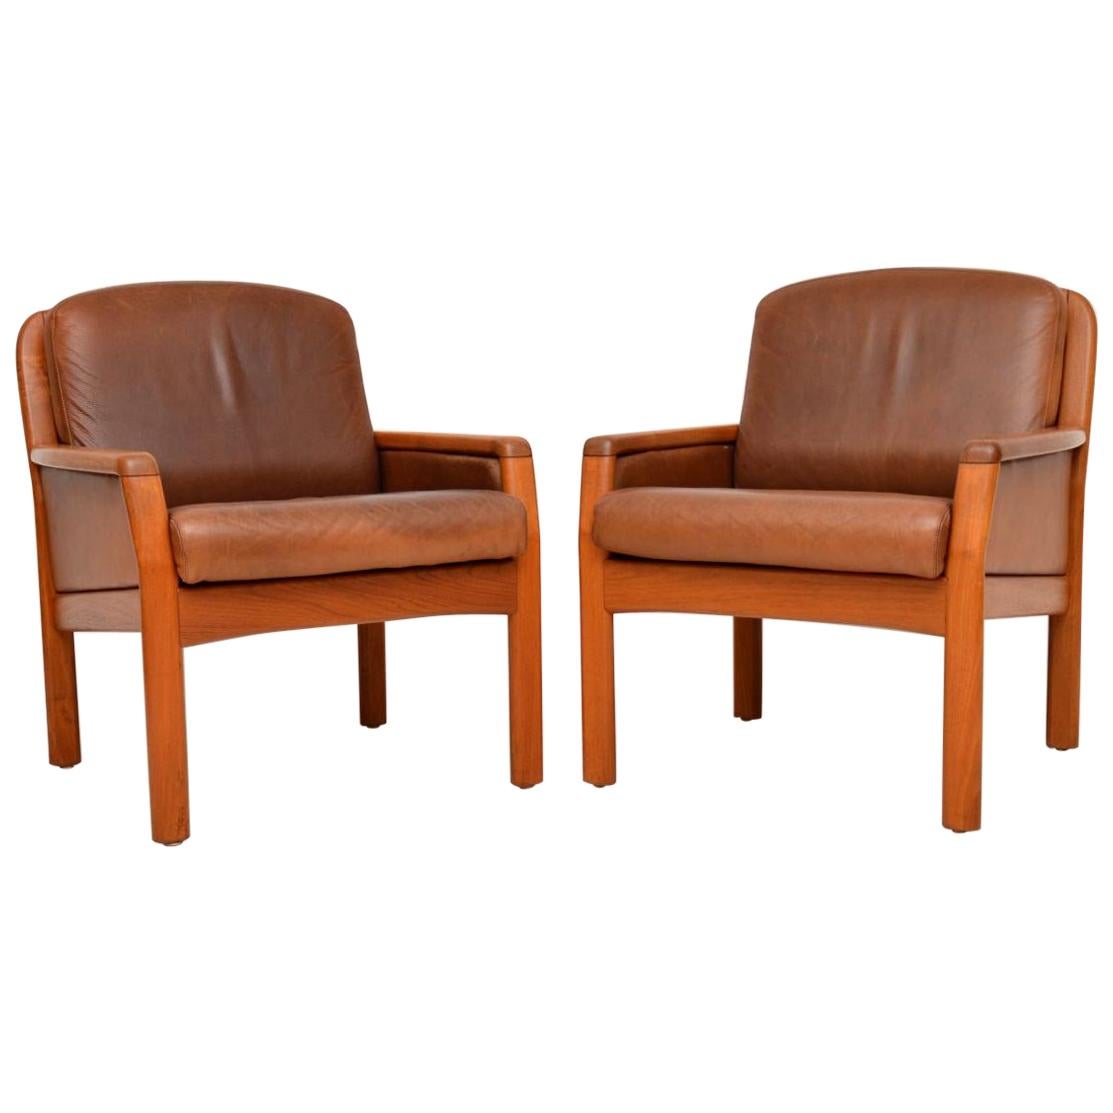 1960s Pair of Danish Teak and Leather Armchairs